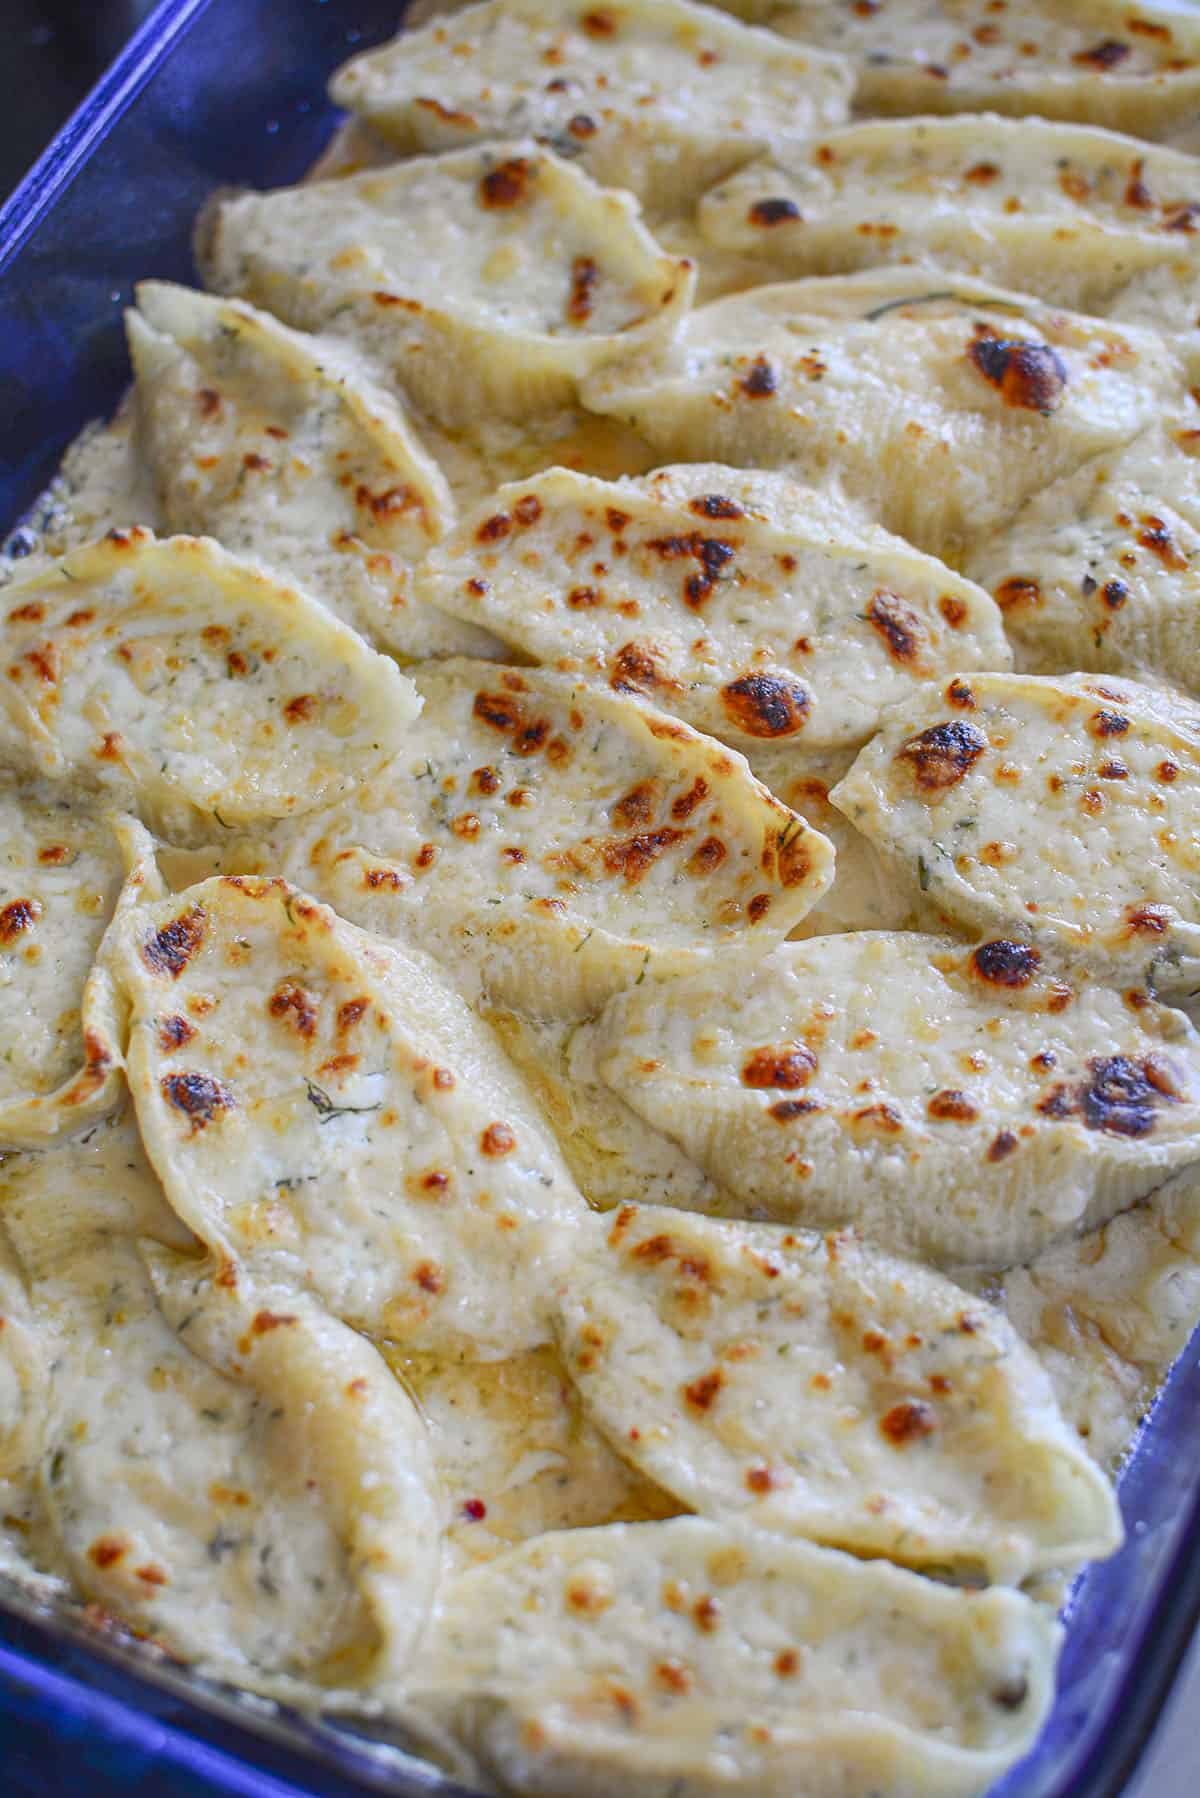 Pasta shells stuffed with cheese and sauce after coming out of the oven.